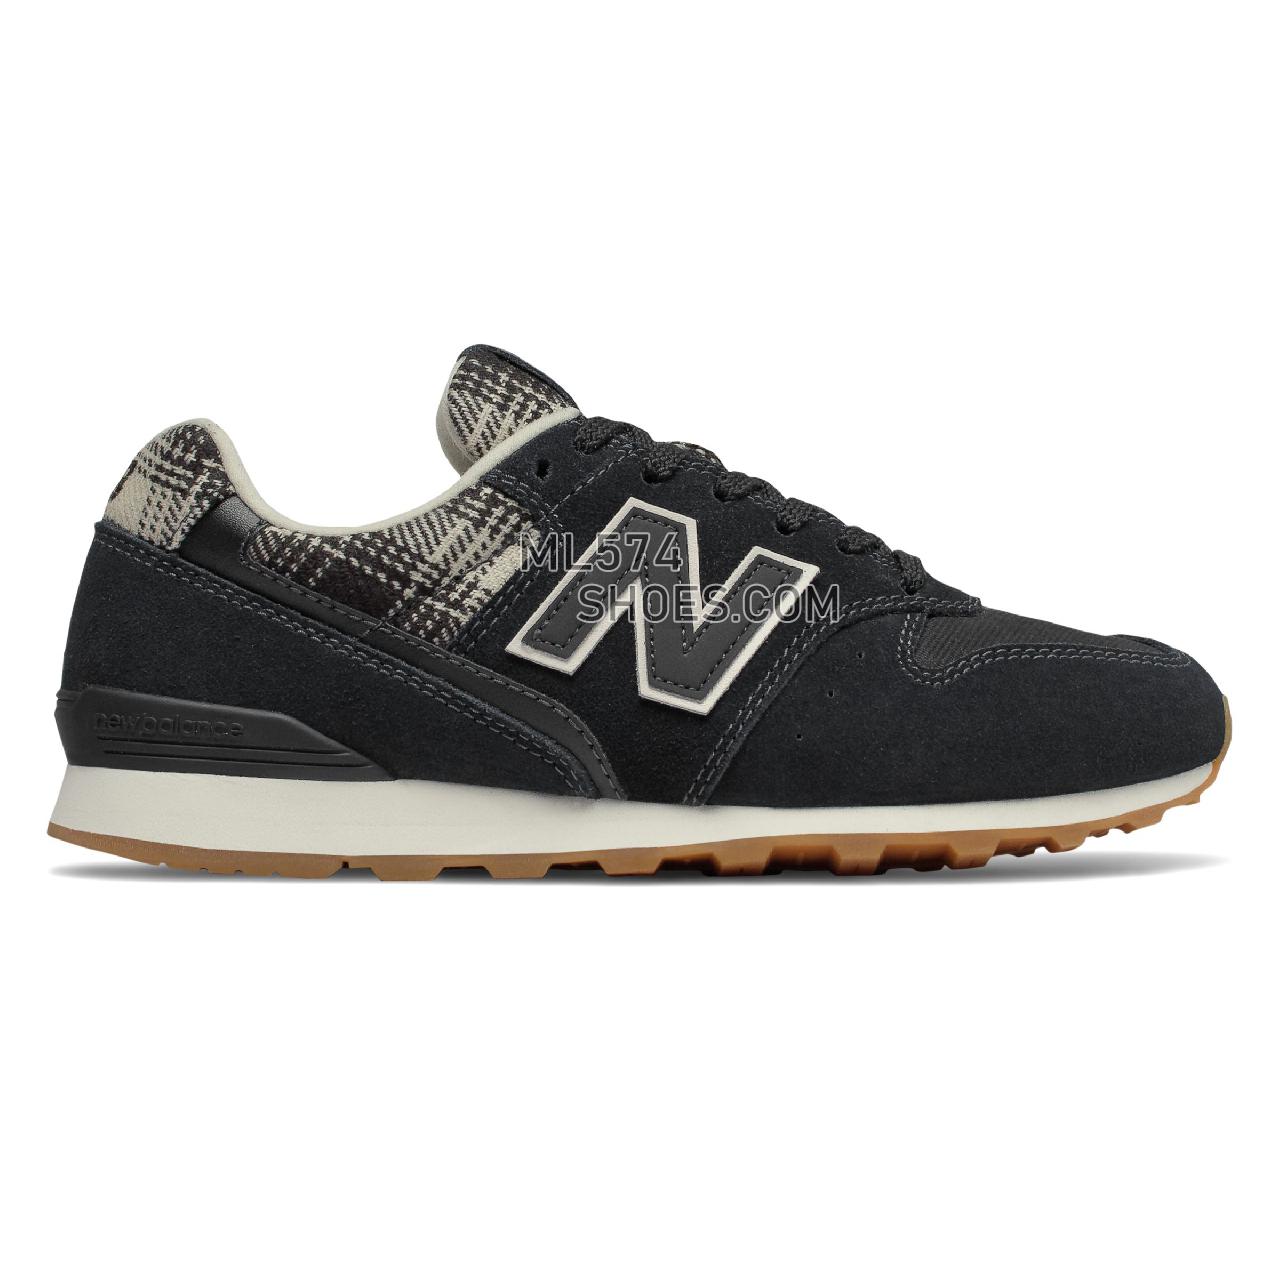 New Balance 996 - Women's Classic Sneakers - Black with Incense - WL996CH